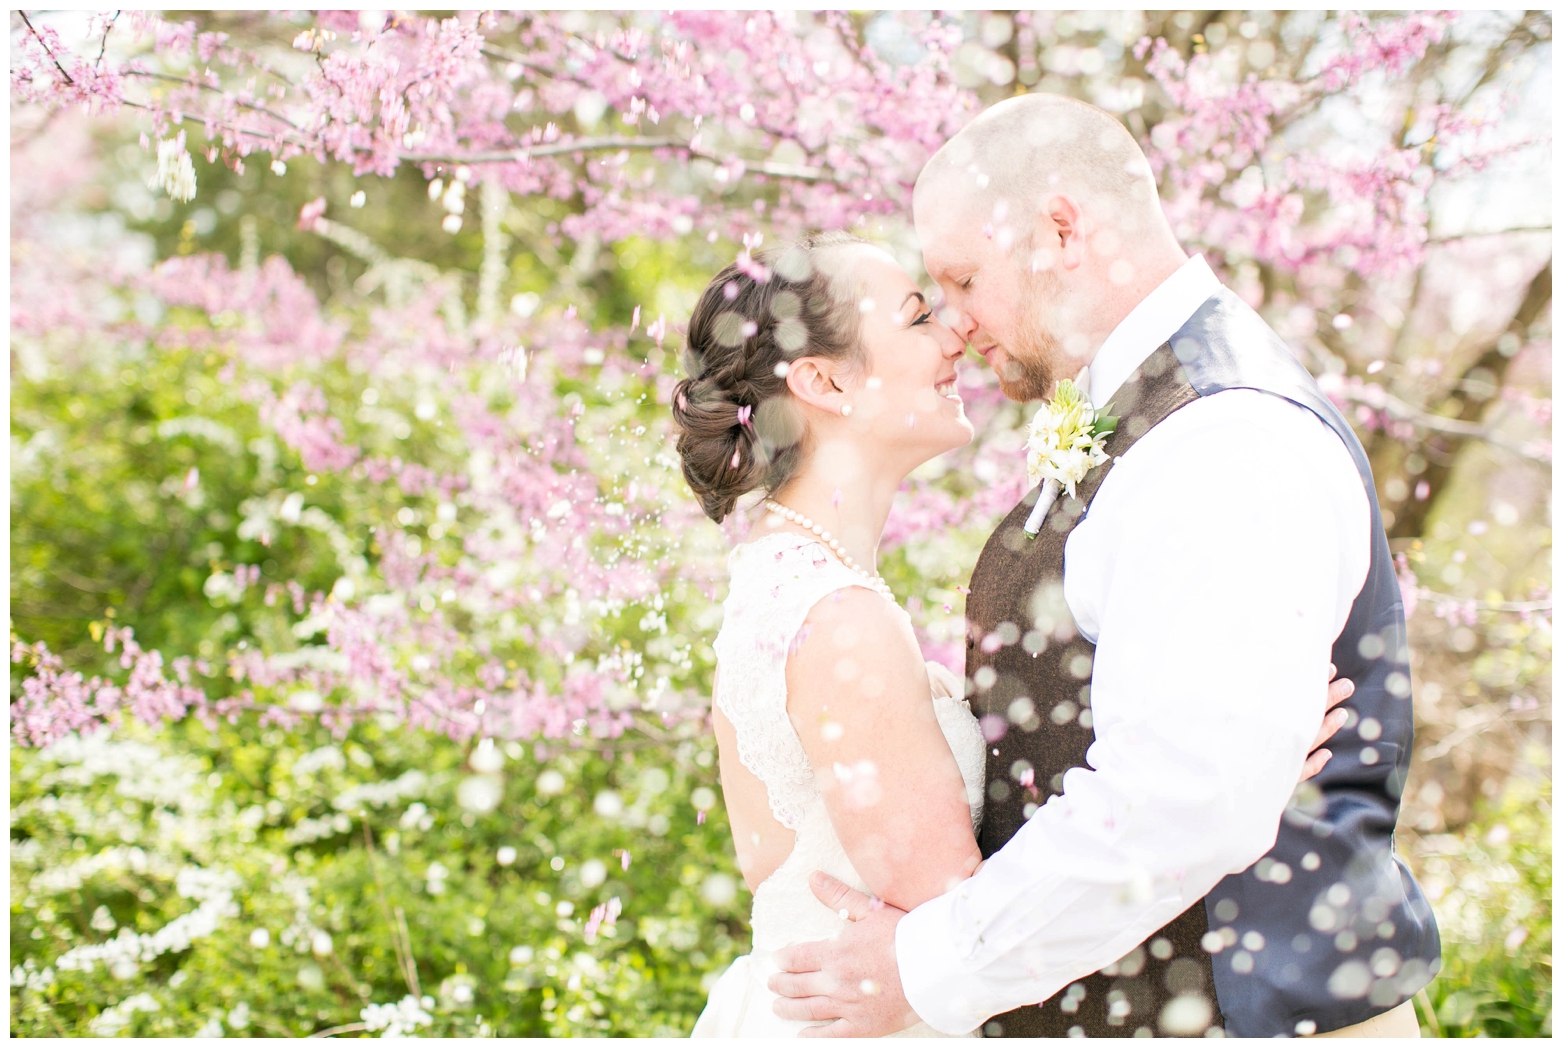 View More: http://hopetaylorphotographyphotos.pass.us/kelsie-and-byron-wedding